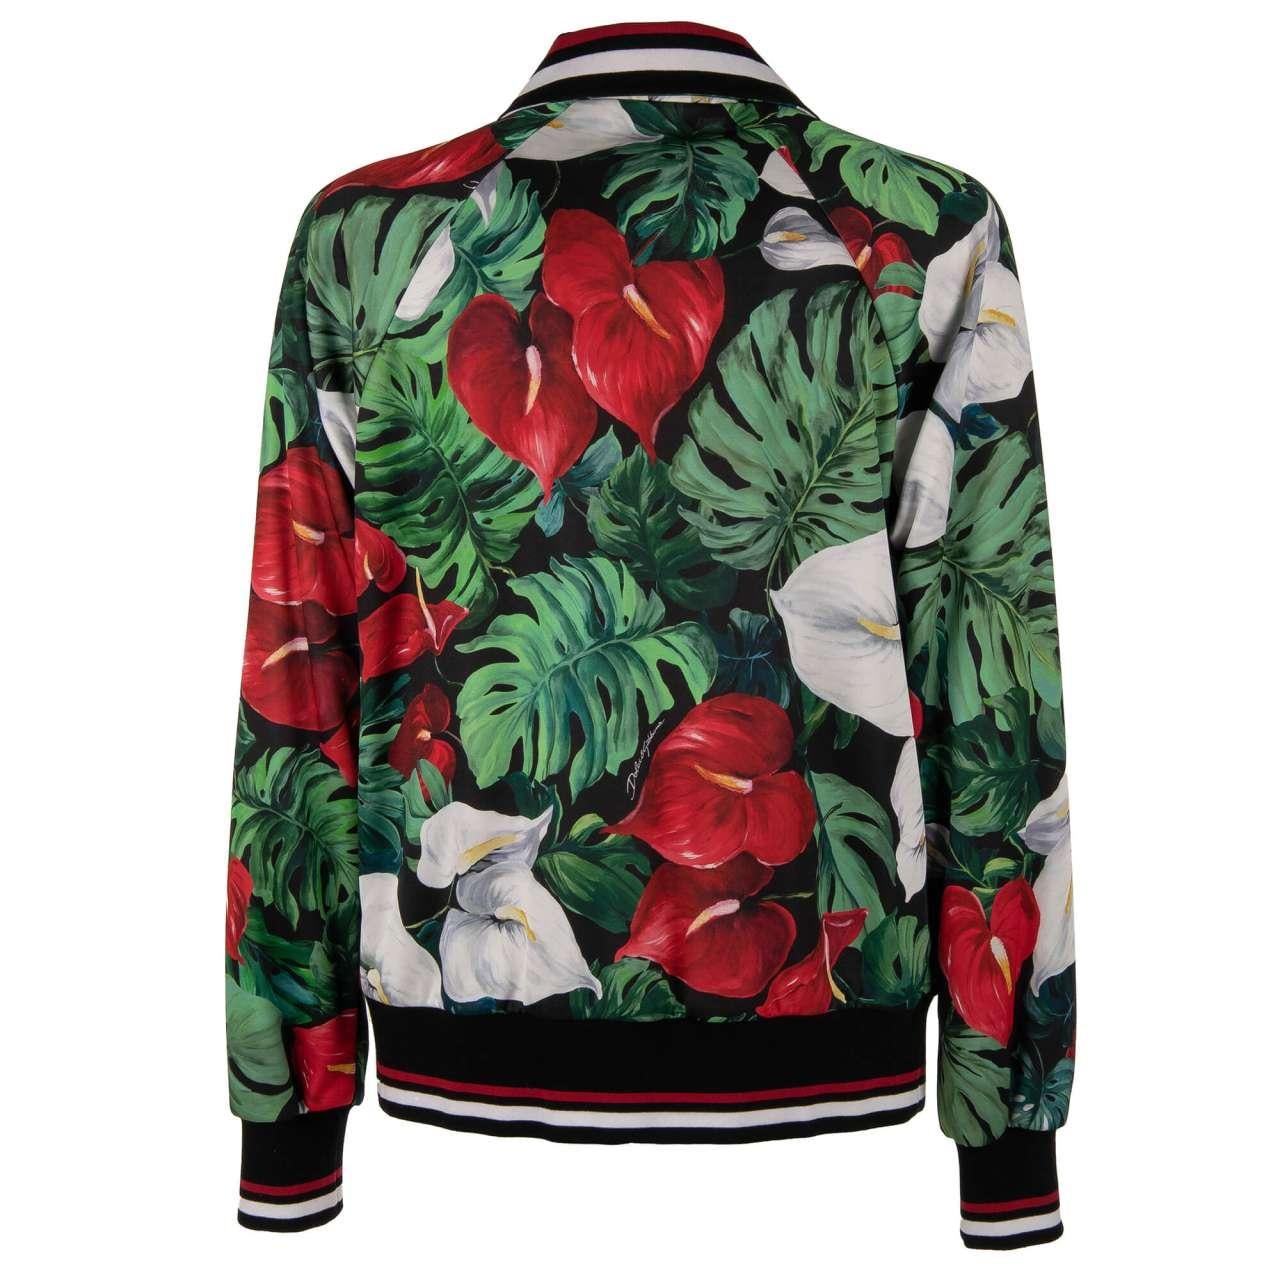 Dolce & Gabbana Floral Printed Track Jacket with Knit Details and Pockets 50 M-L 1